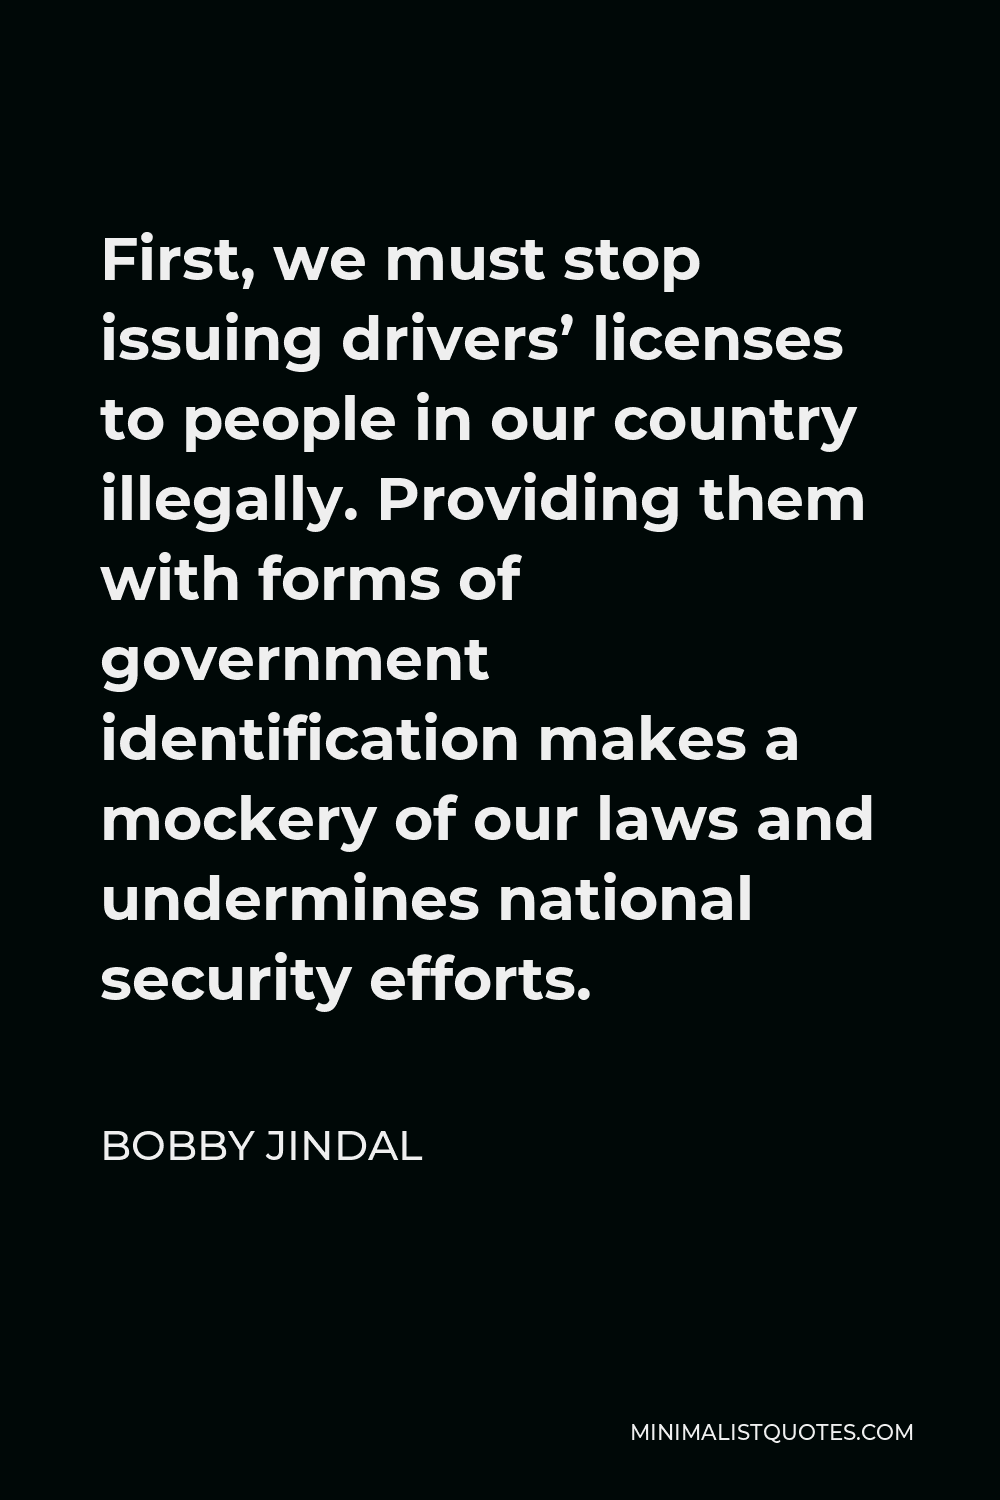 Bobby Jindal Quote - First, we must stop issuing drivers’ licenses to people in our country illegally. Providing them with forms of government identification makes a mockery of our laws and undermines national security efforts.